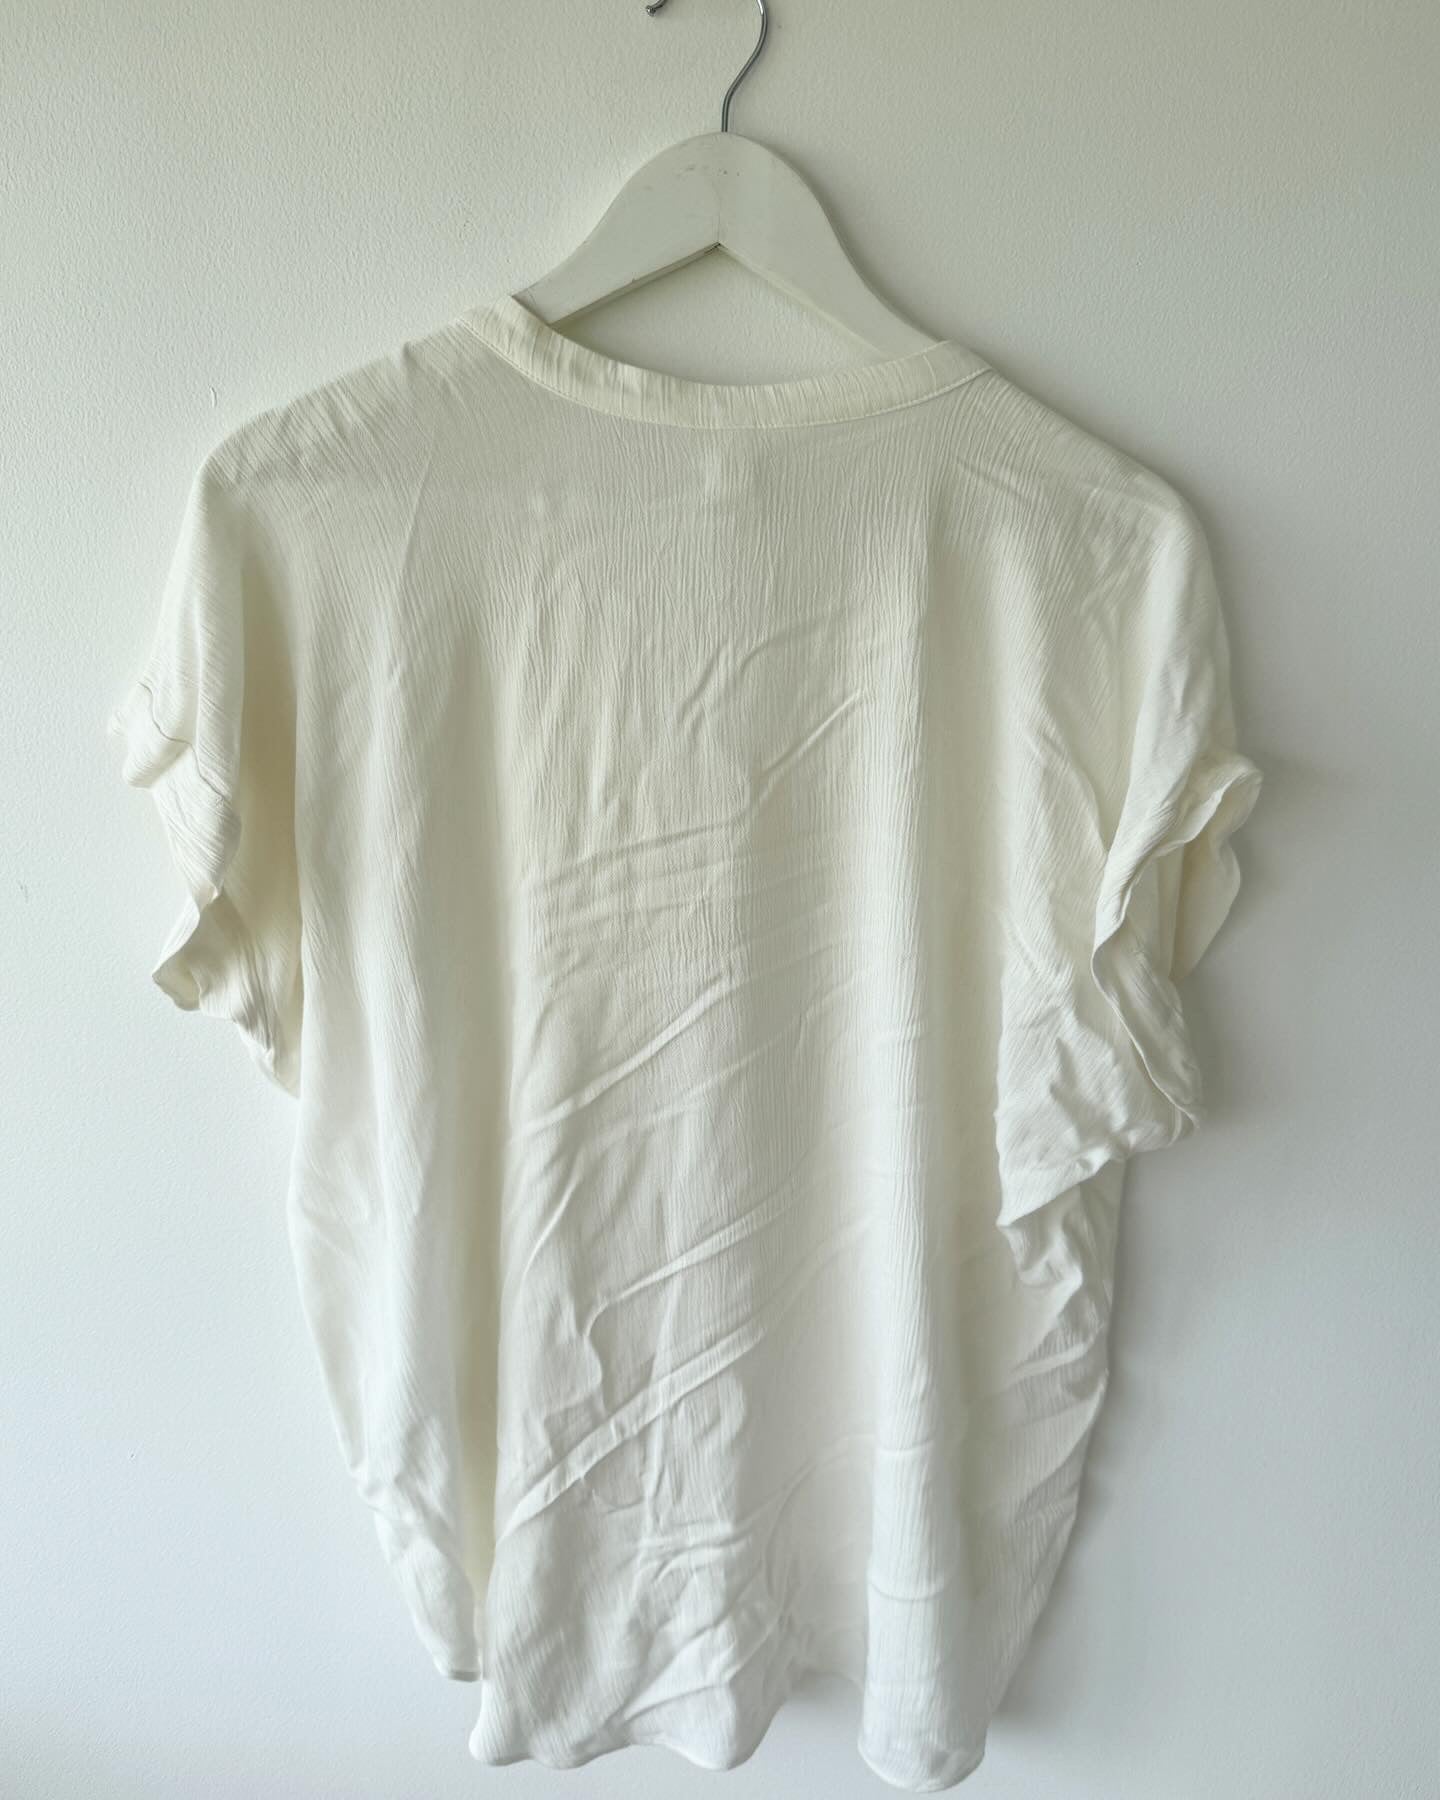 Cotton Tee (Second hand)